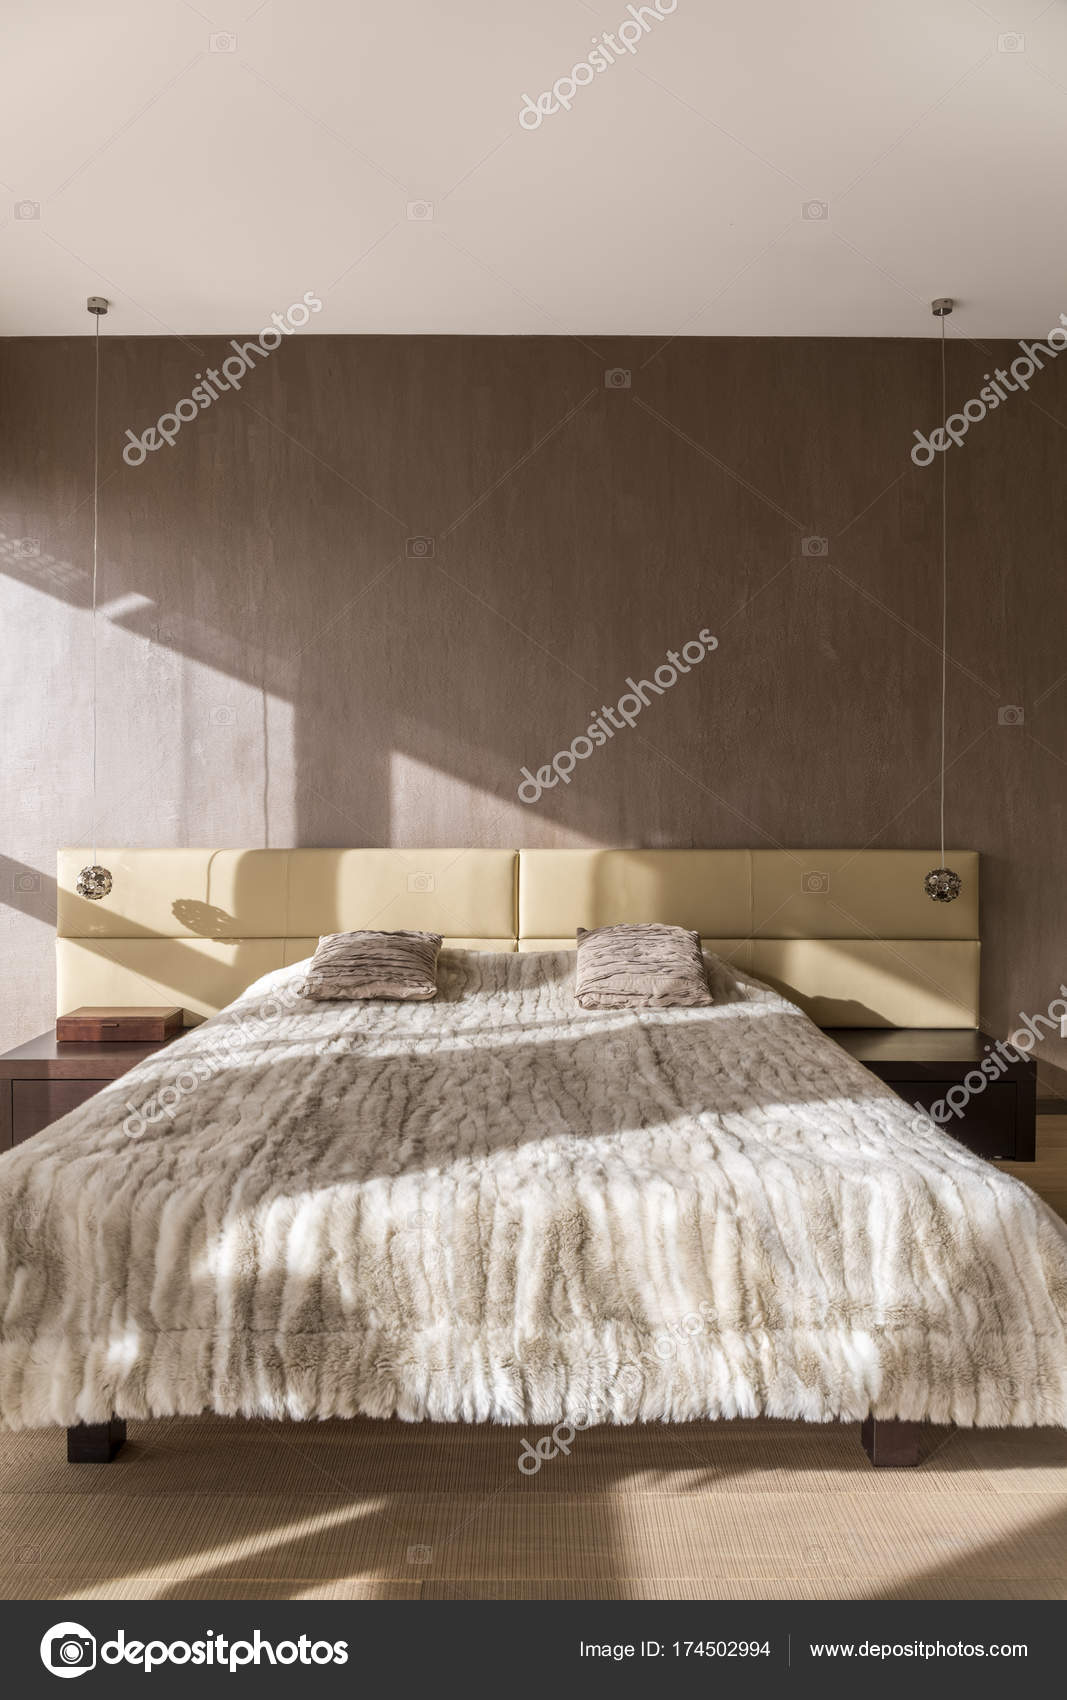 King Size Bed With Beige Coverlet Stock Photo C Photographee Eu